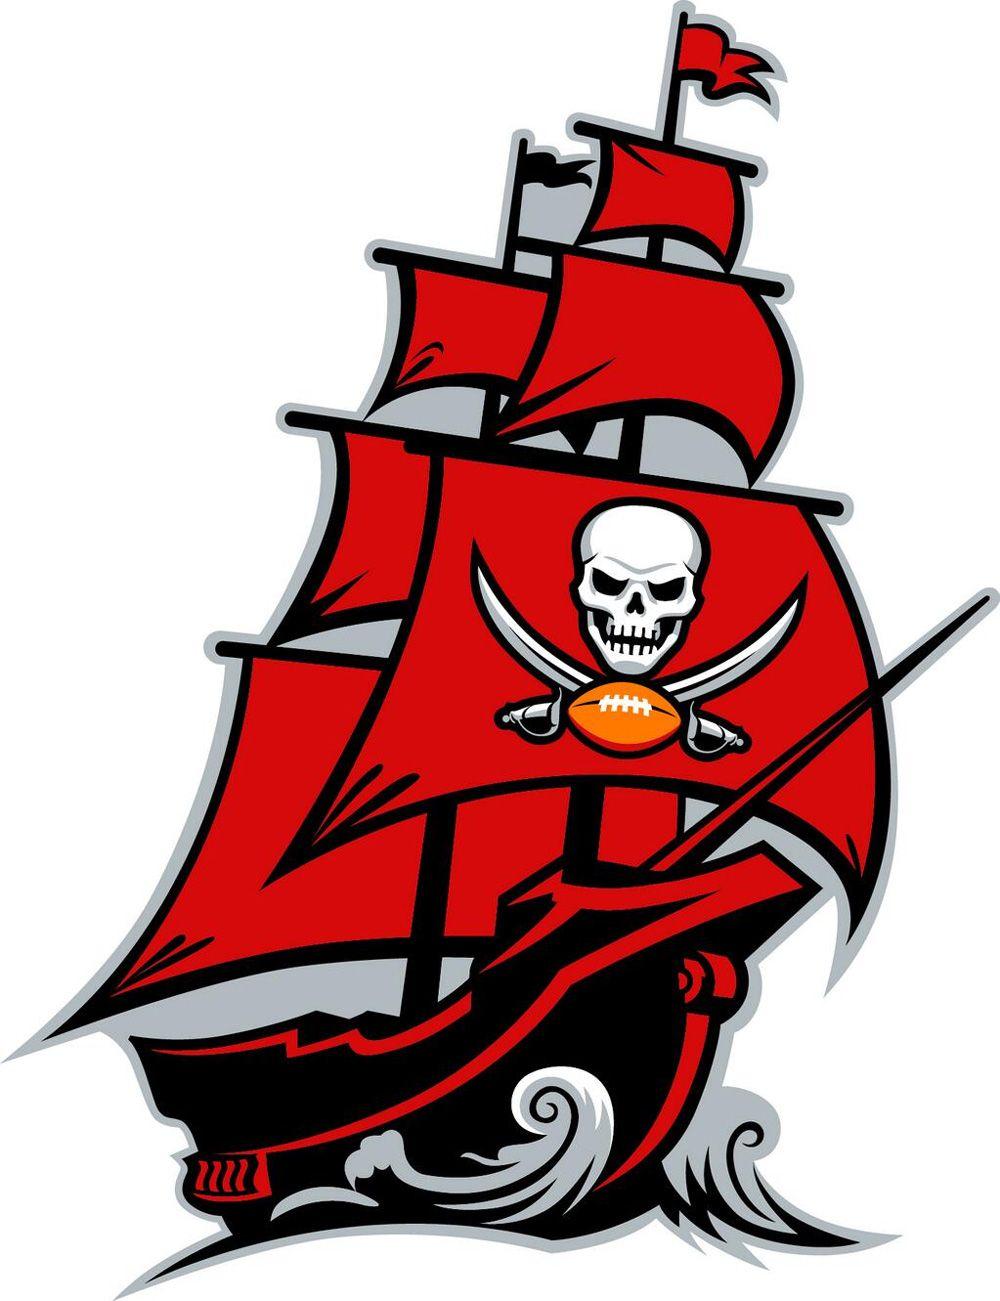 Red Sailing Ship Logo - Brand New: New Logo, Identity, and Helmet for Tampa Bay Buccaneers